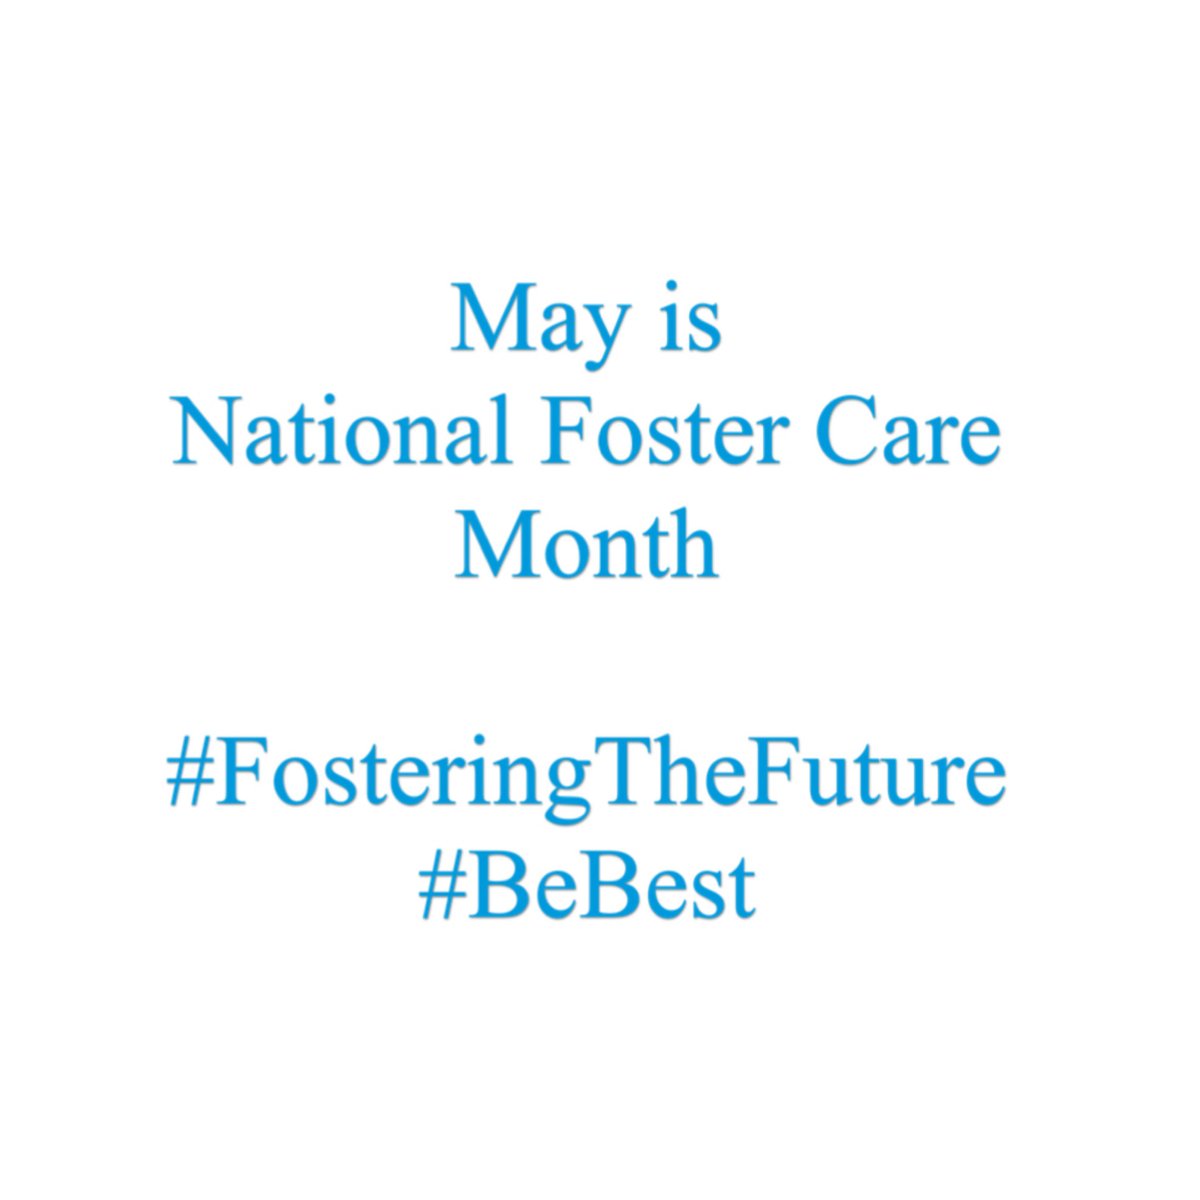 National Foster Care Month is a time to reflect, and continue to support the foster care community.  
Together, let’s work to provide foster care families the tools and resources needed to realize their potential. 
#FosteringTheFuture #BeBest